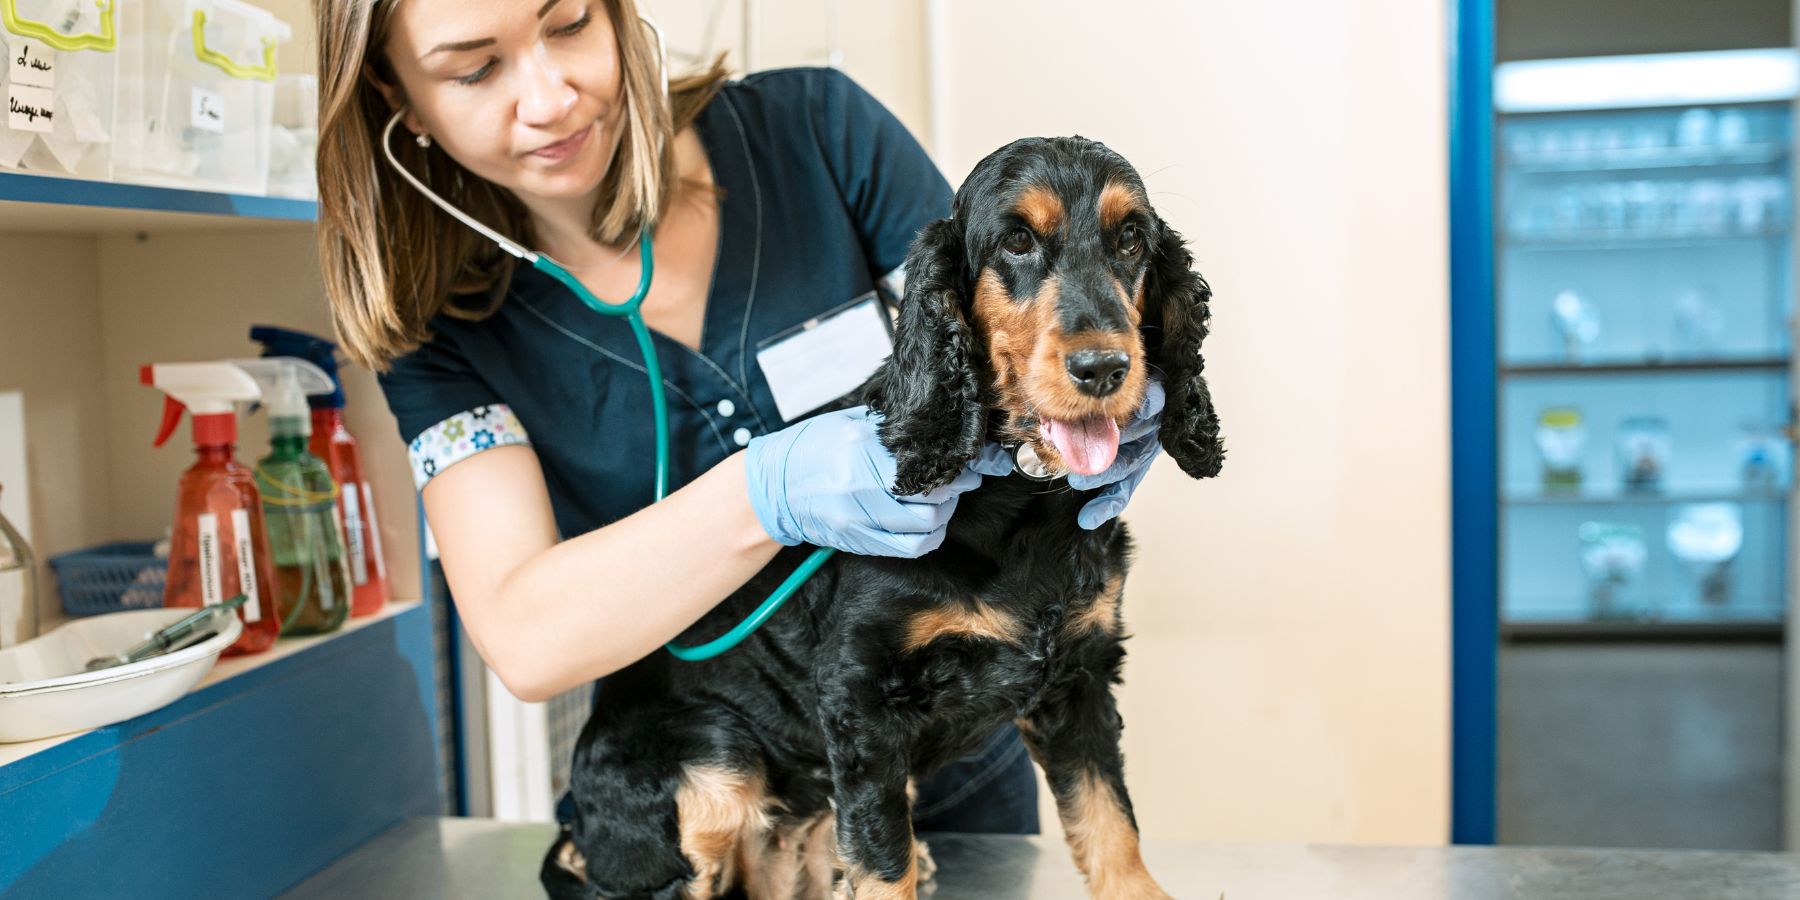 Your Dog’s Health Adventure: A Trip to the Pet Vet